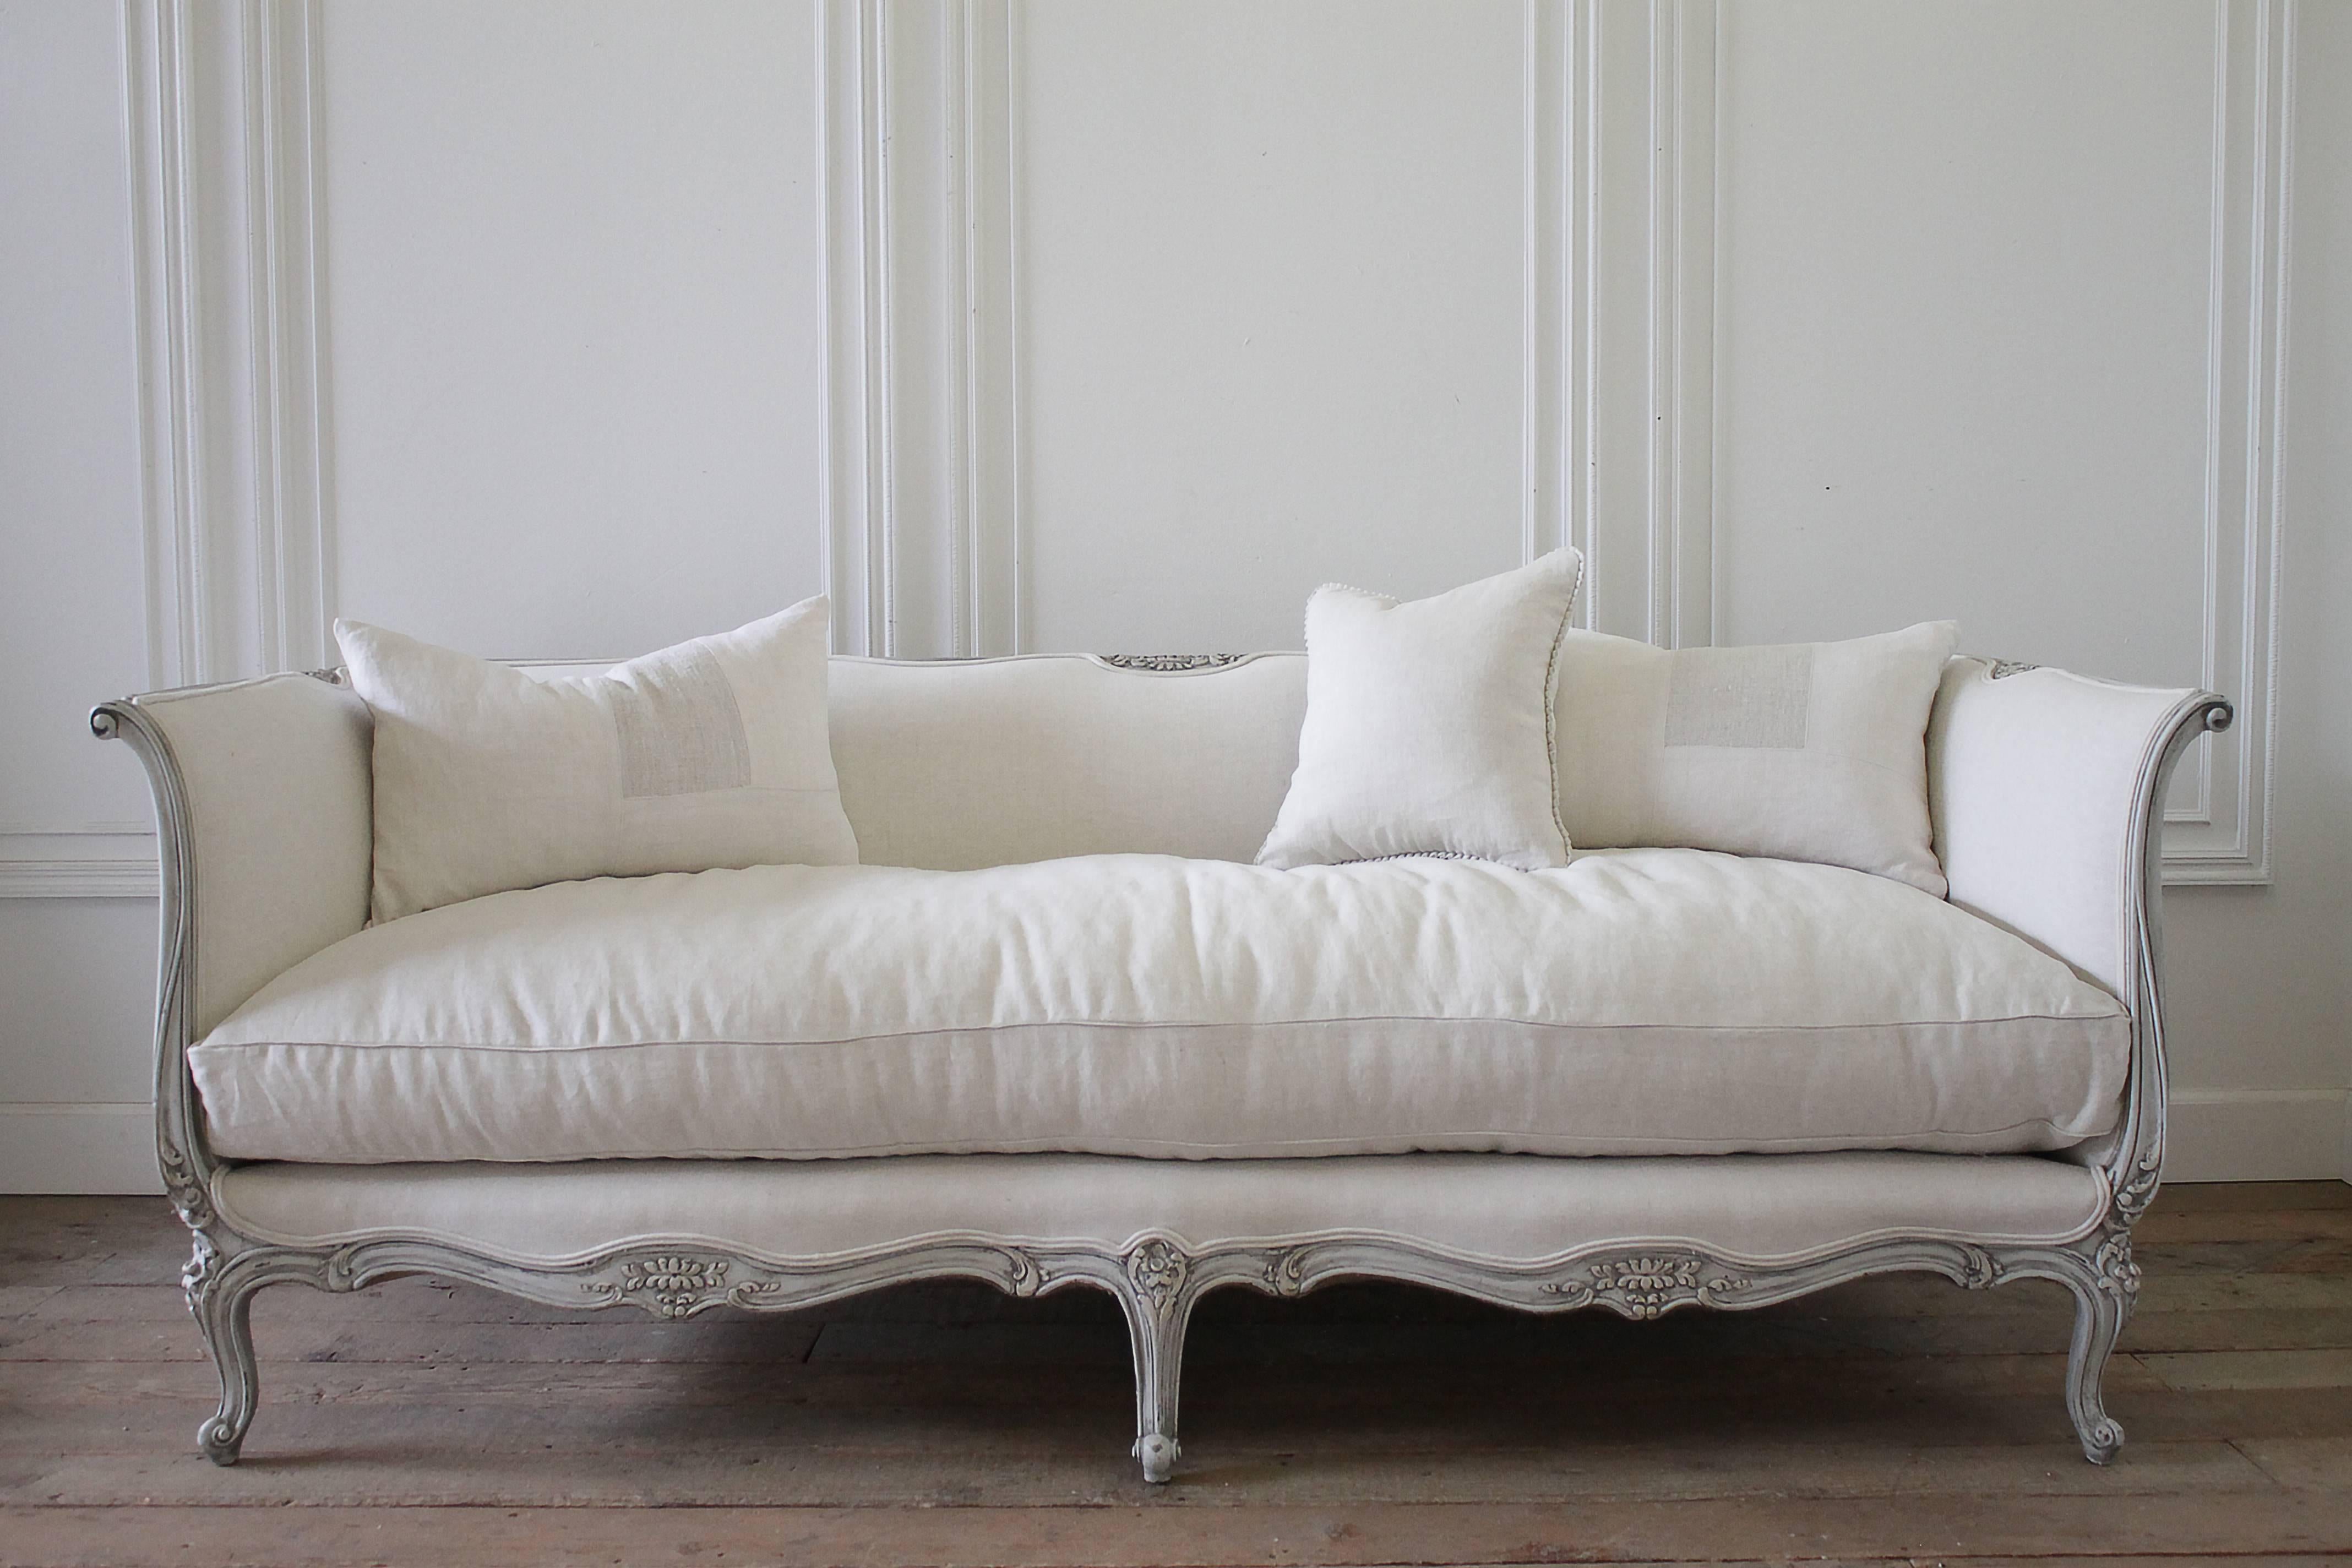 Lovely French Louis XV style sofa painted in our grain sack grey paint, and hand distressed aged patina. Classic cabriole carved legs with flower carvings. We reupholstered this sofa in a light oatmeal Belgian linen, and brand new plump cloud down